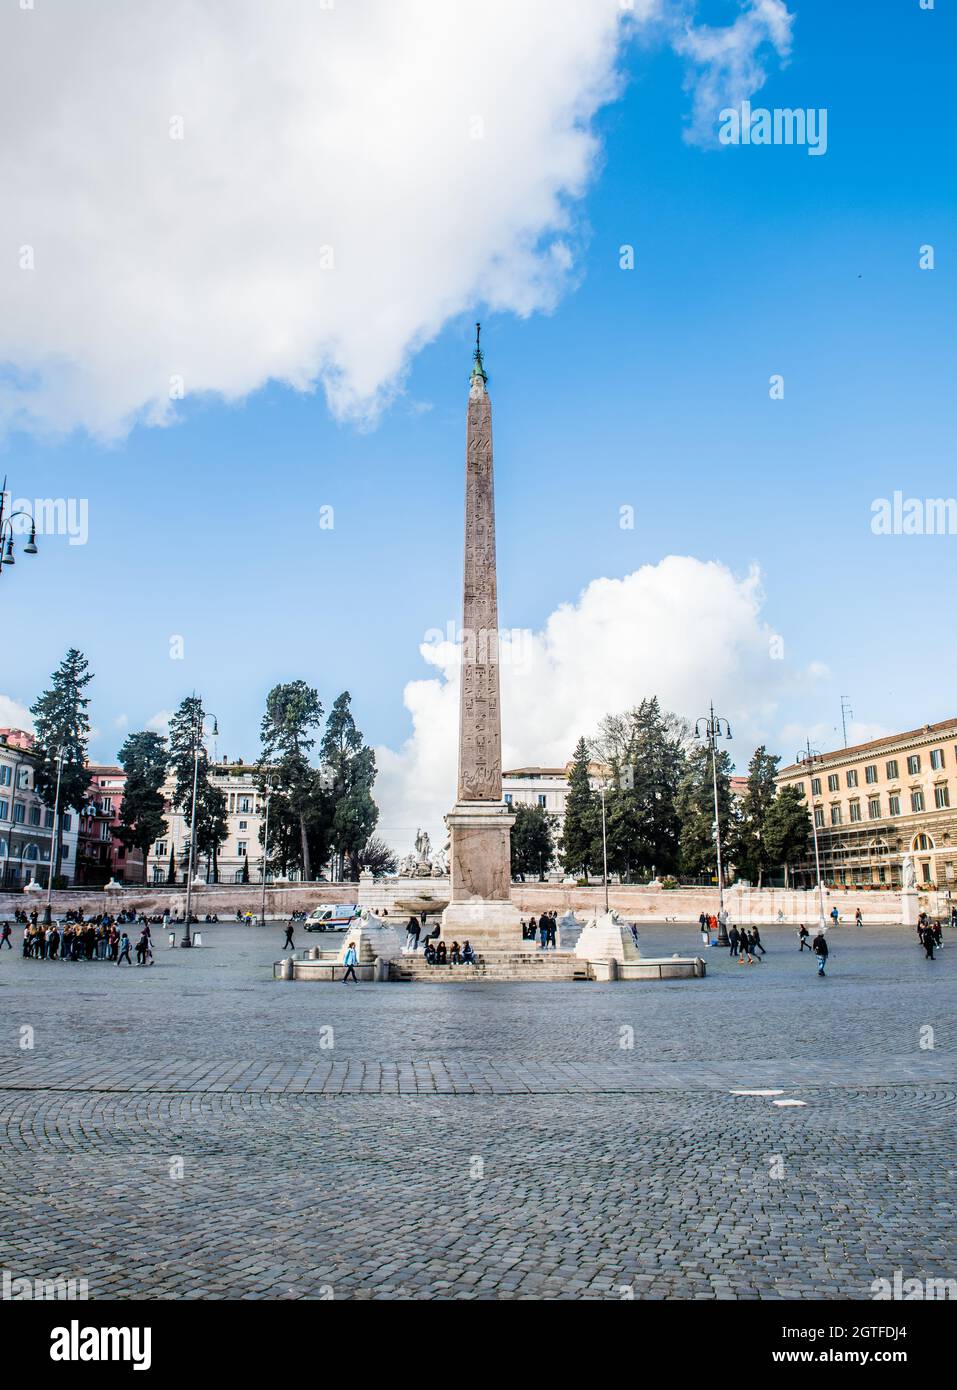 View Of Obelisk Against Blue Sky During Sunny Day Stock Photo